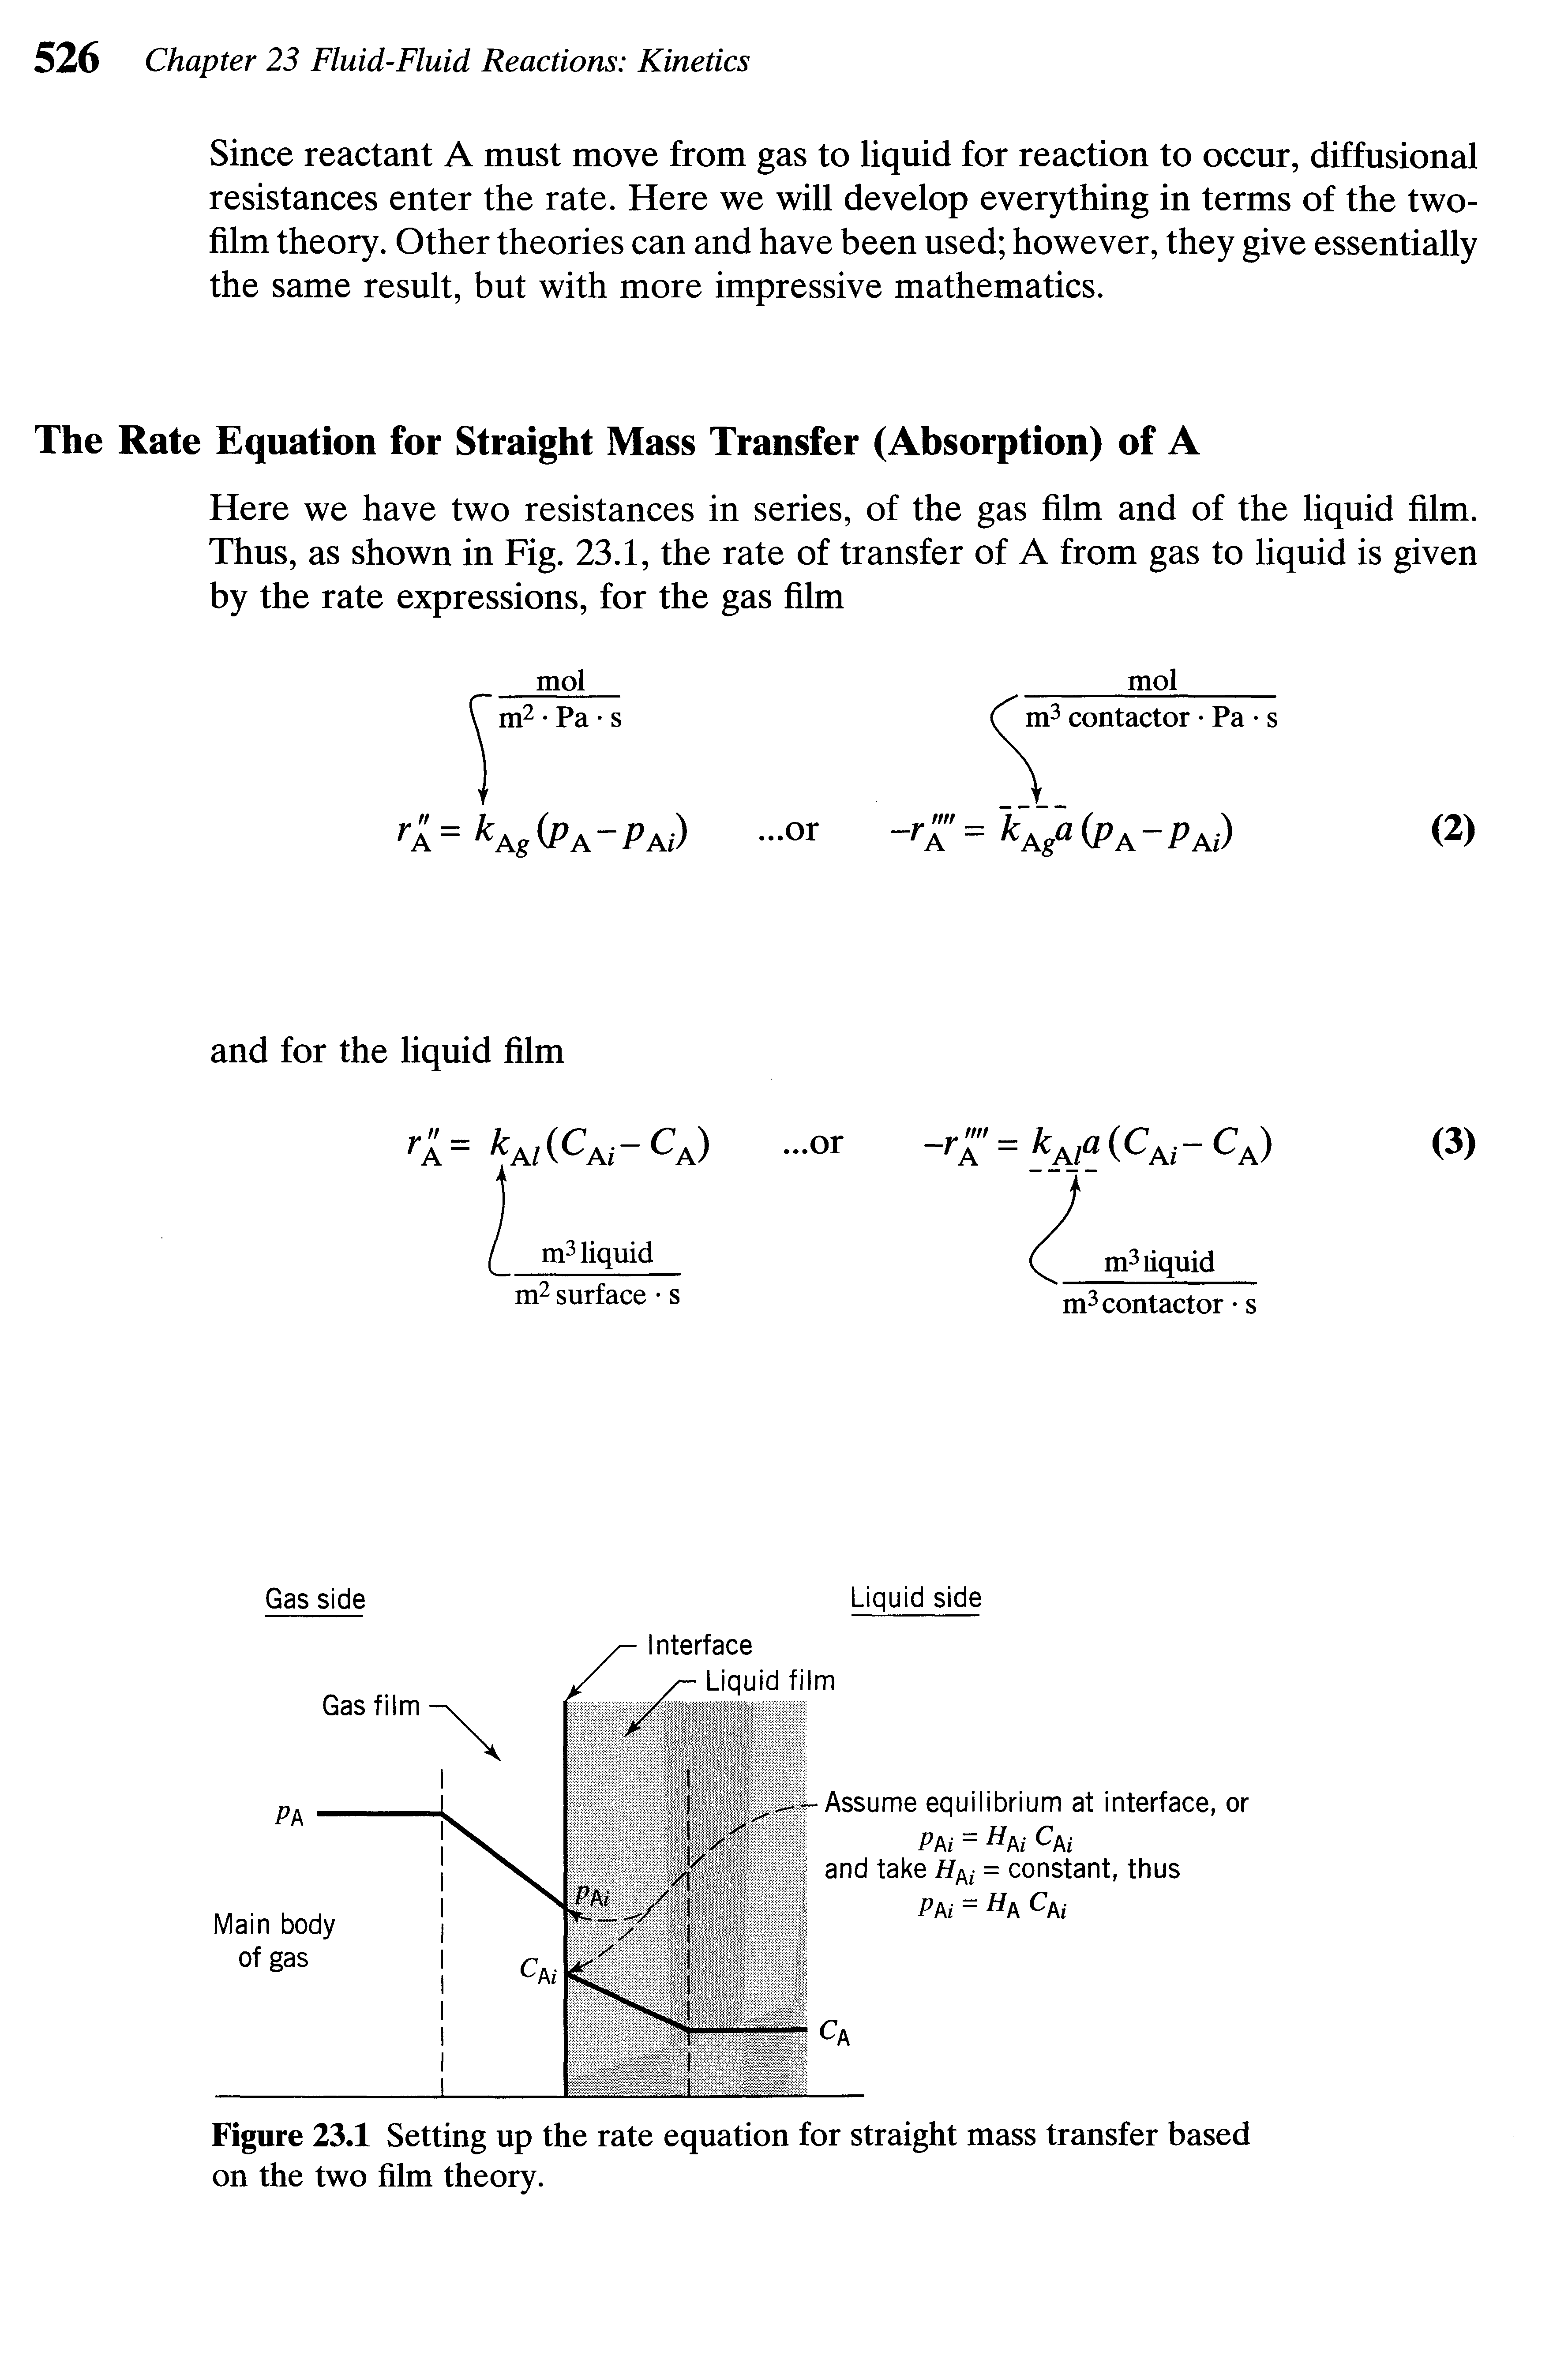 Figure 23.1 Setting up the rate equation for straight mass transfer based on the two film theory.